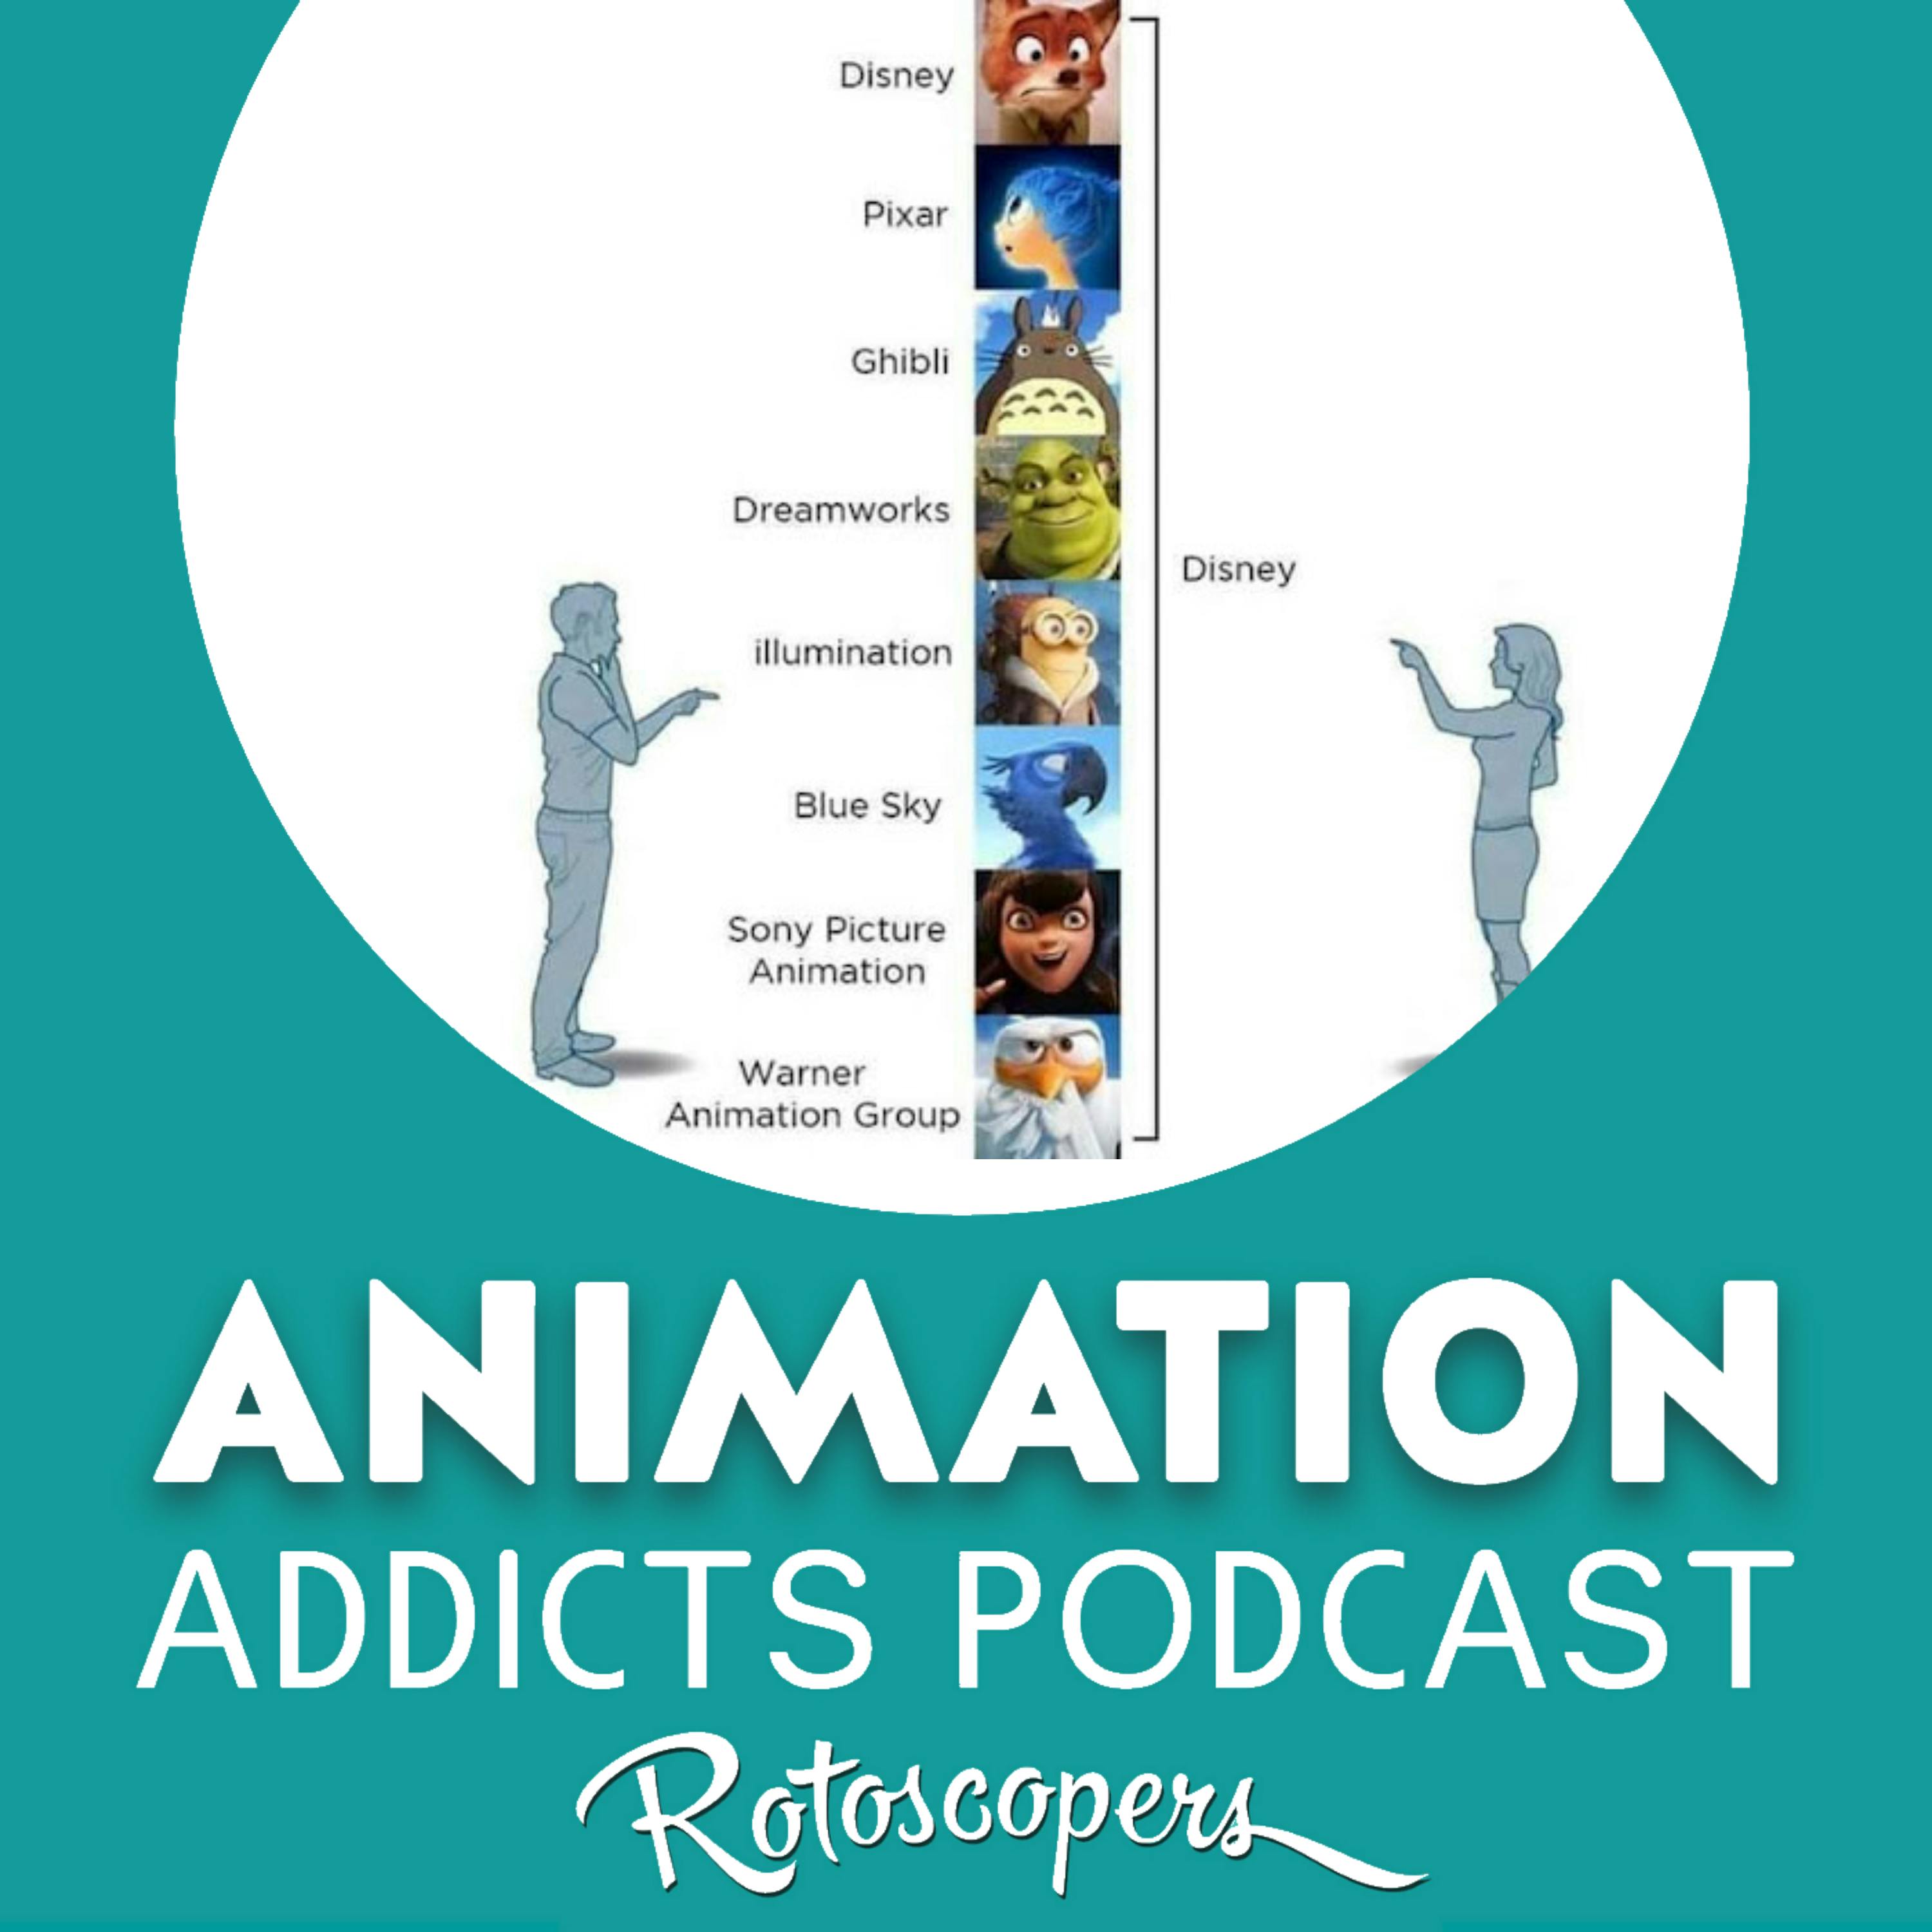 295 The Who's Who In The Animation Industry - Does Disney Really Own Everything?